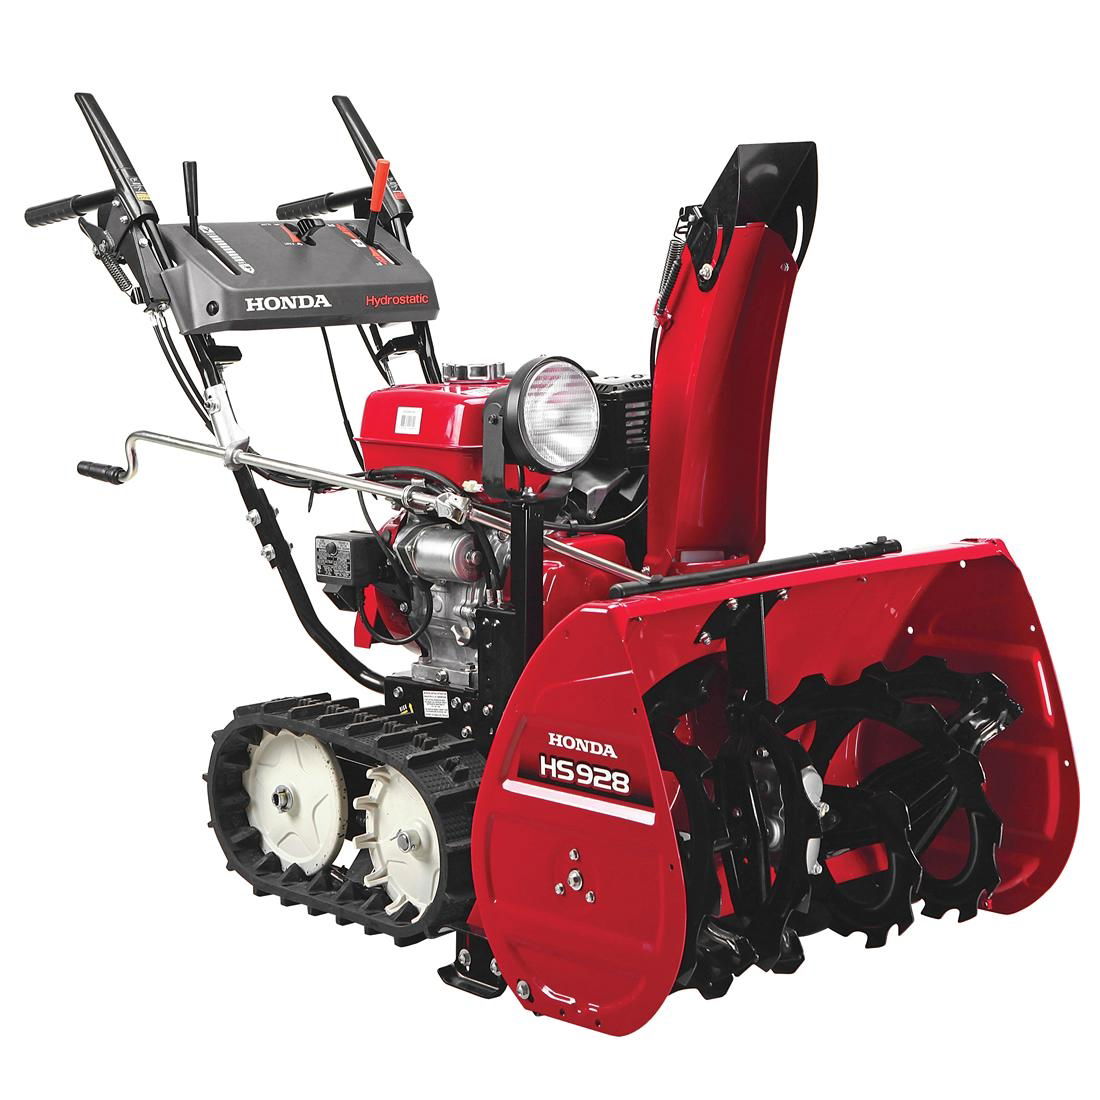 Honda HS928TA 28" Two Stage Snow Blower